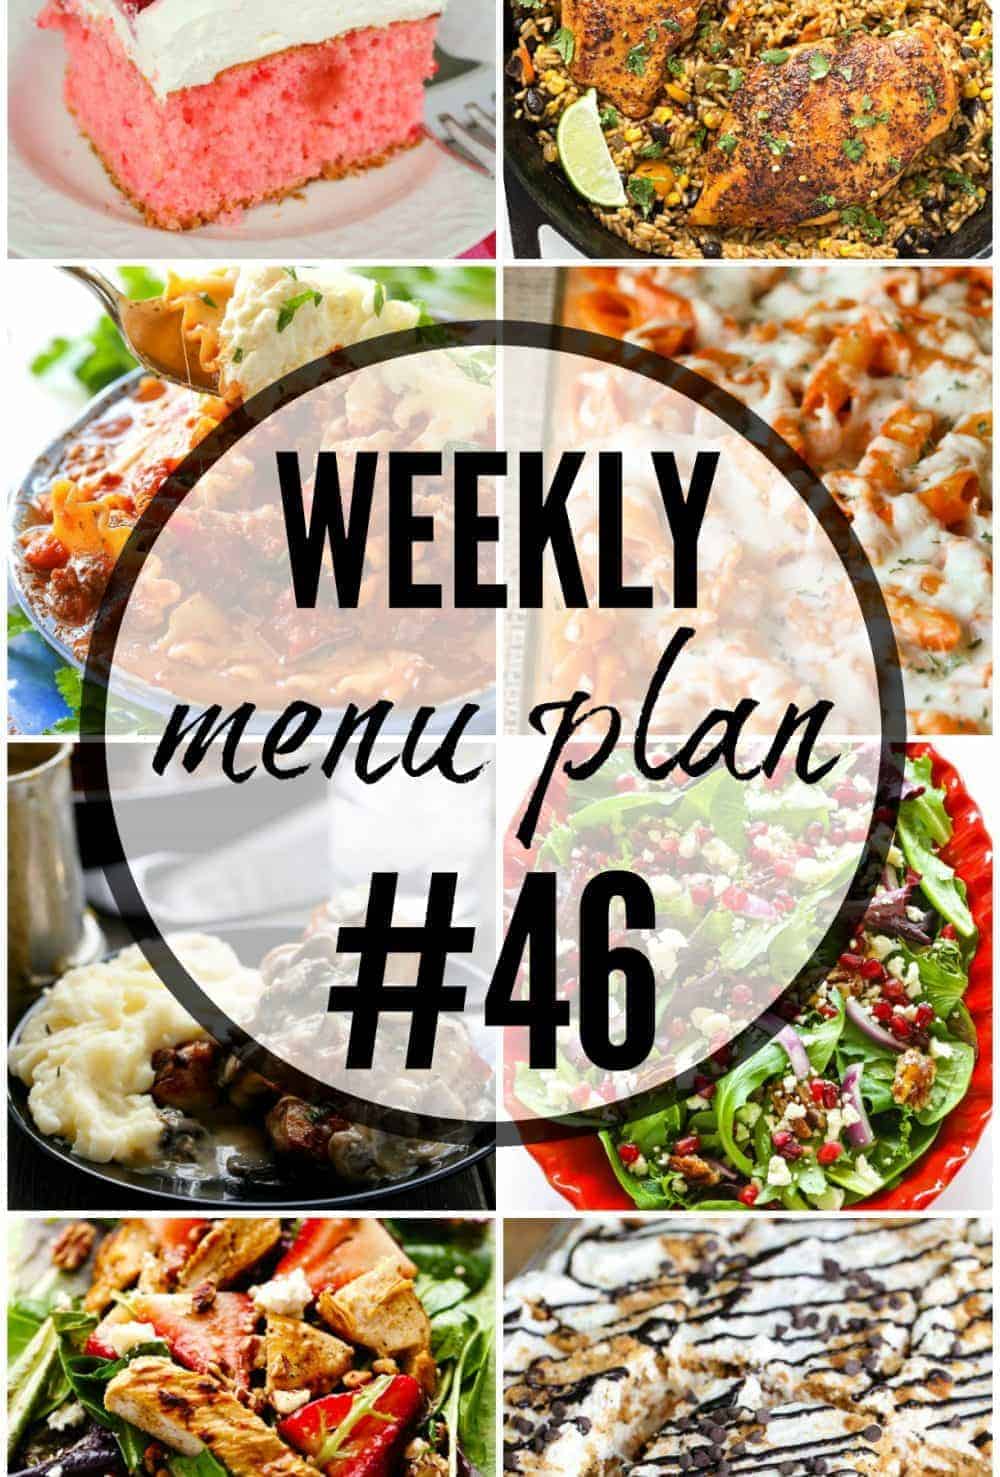 Weekly Meal Plan Archives - Page 8 of 8 - Cafe Delites